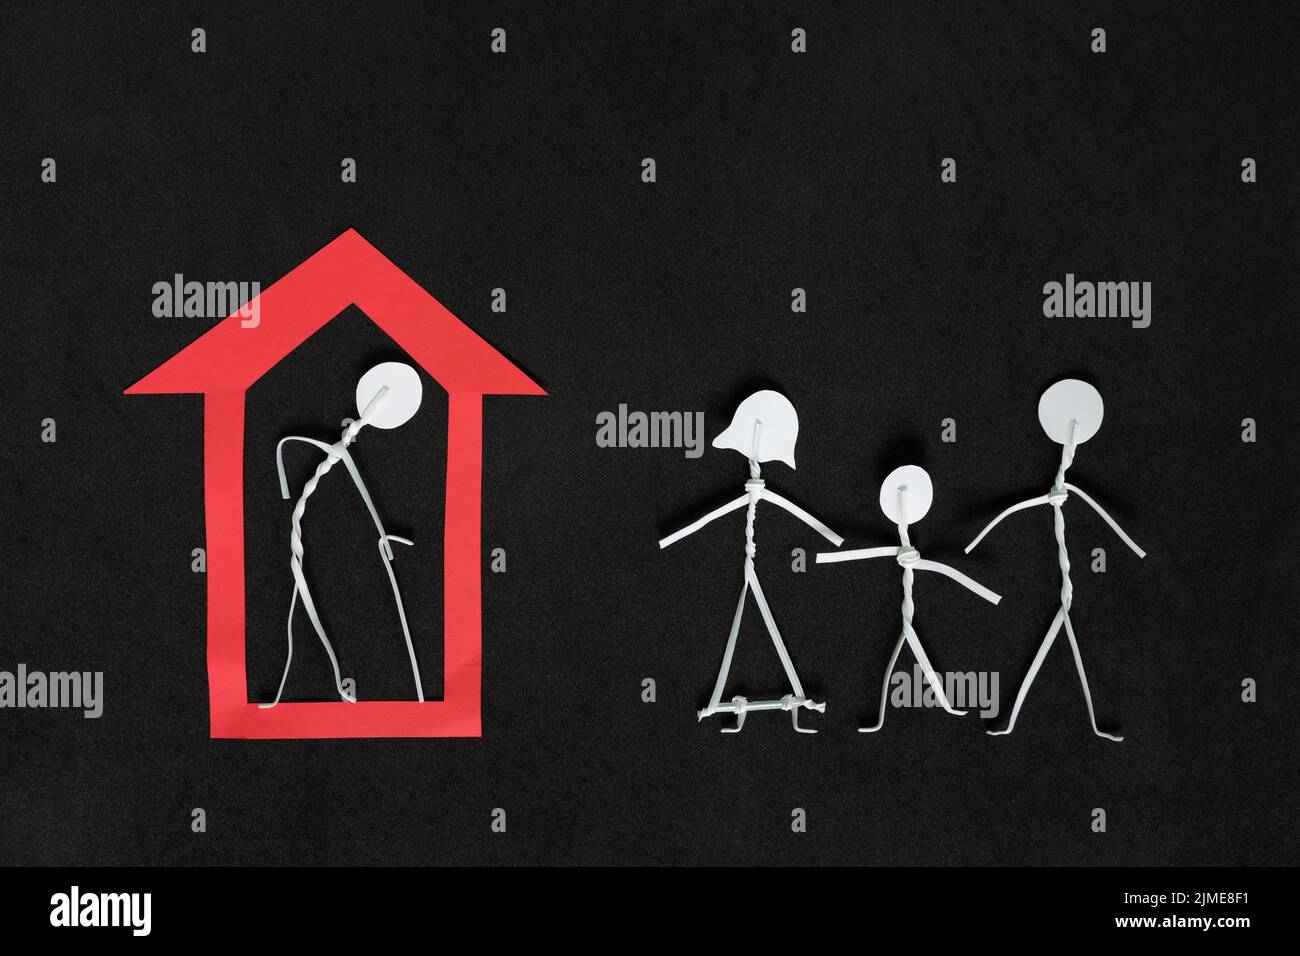 Seniors or old people feeling of isolation, social exclusion and loneliness concept. Elderly man stick figure alone inside a house in dark black Stock Photo